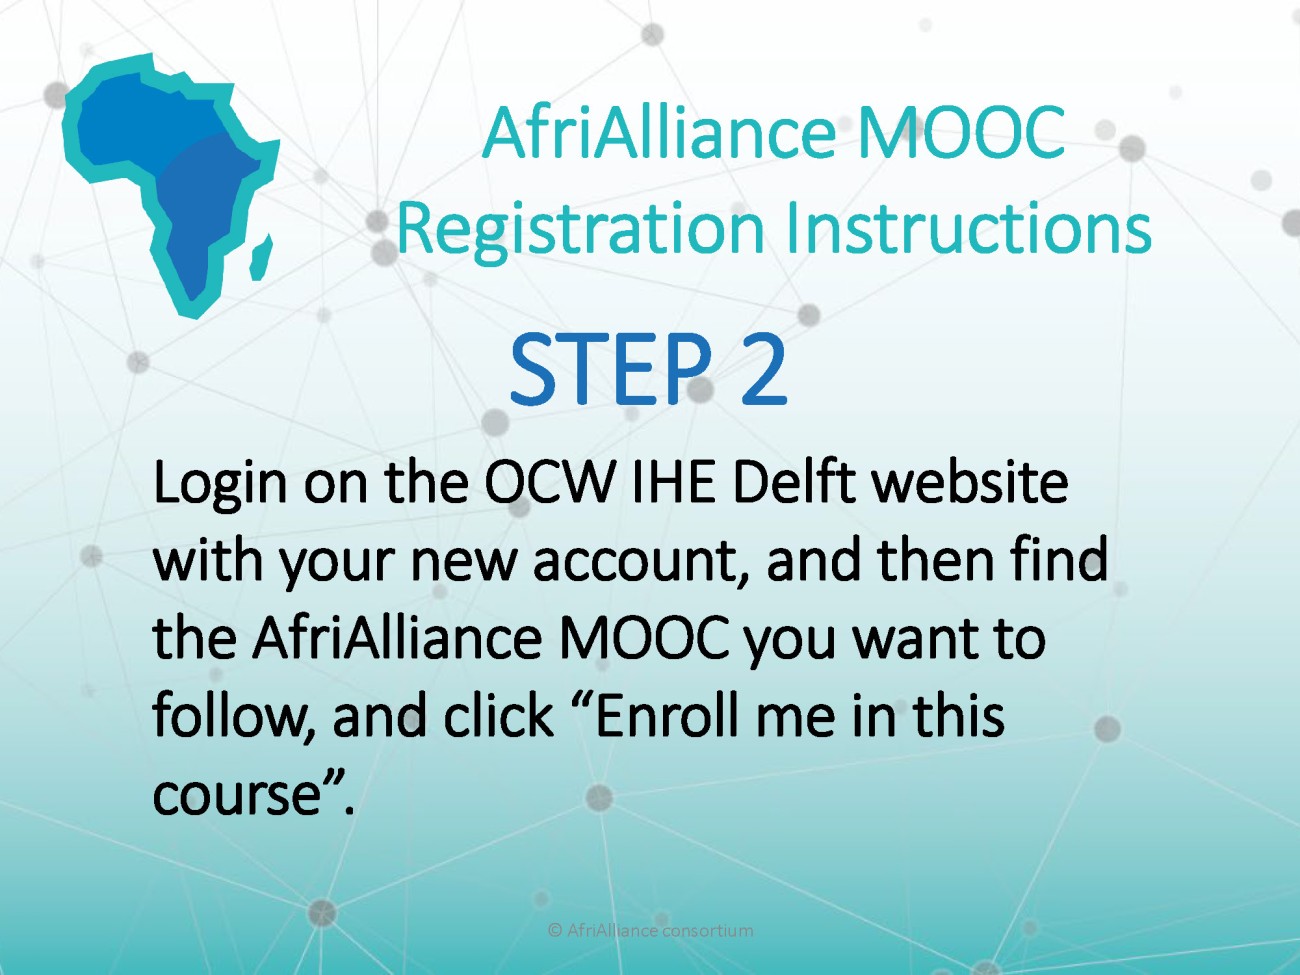 Step 2 of the instructions to enrolling in AfriAlliance MOOCs